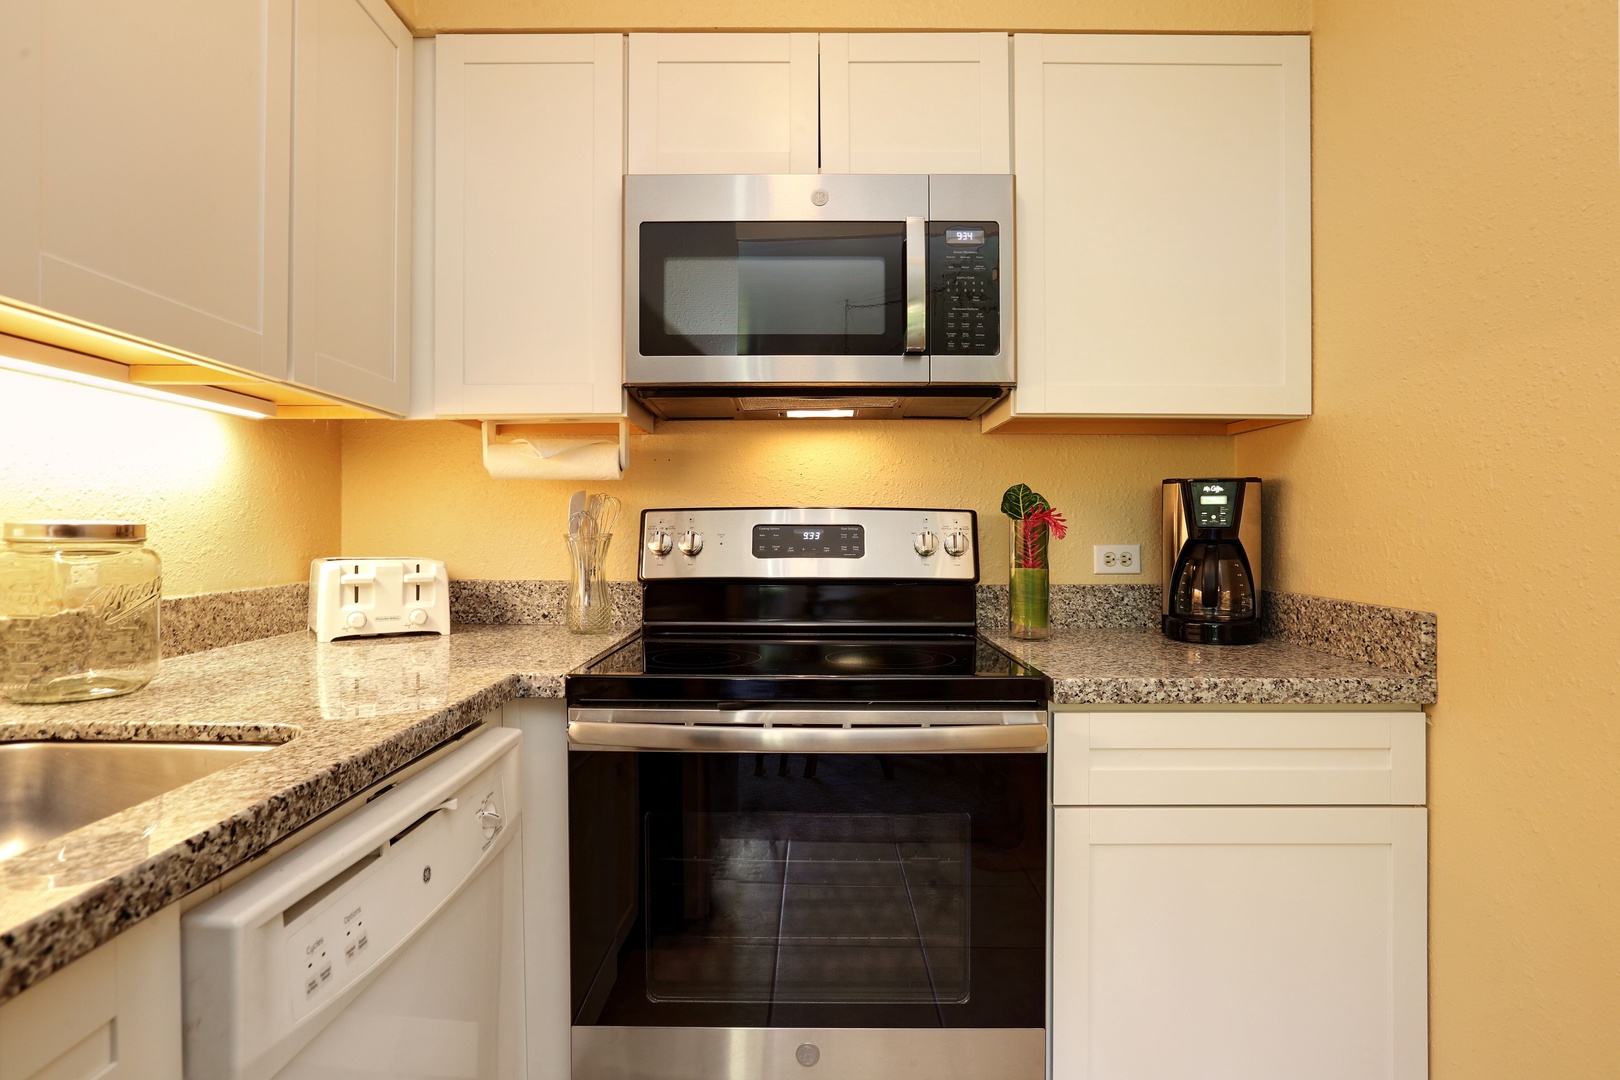 Lahaina Vacation Rentals, Paki Maui 313 - Kitchen with all the amenities needed to cook every meal